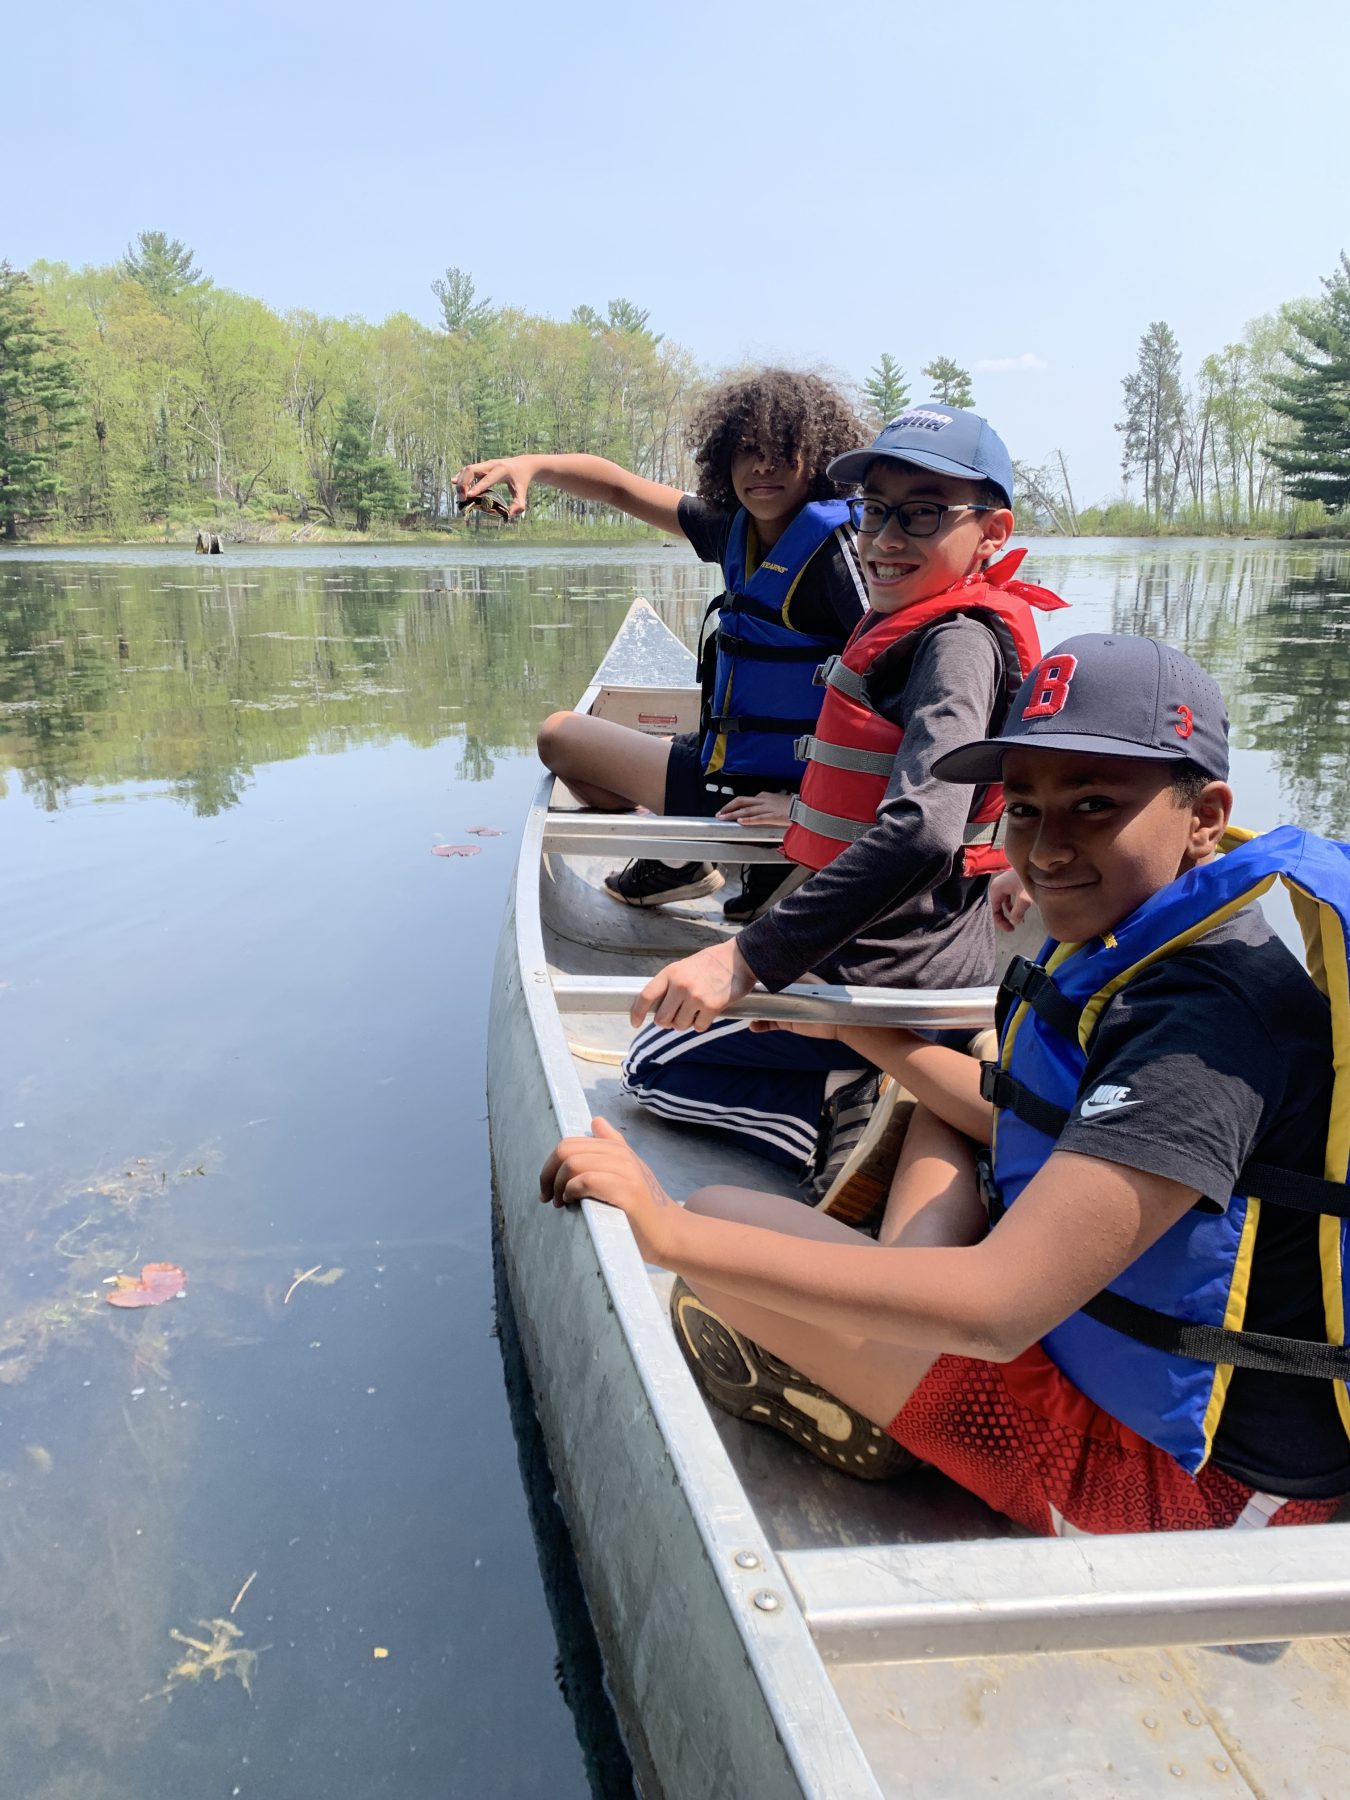 3 kids sitting in a canoe, one child is holding a turtle on Hidden Lake at Camp Foley 